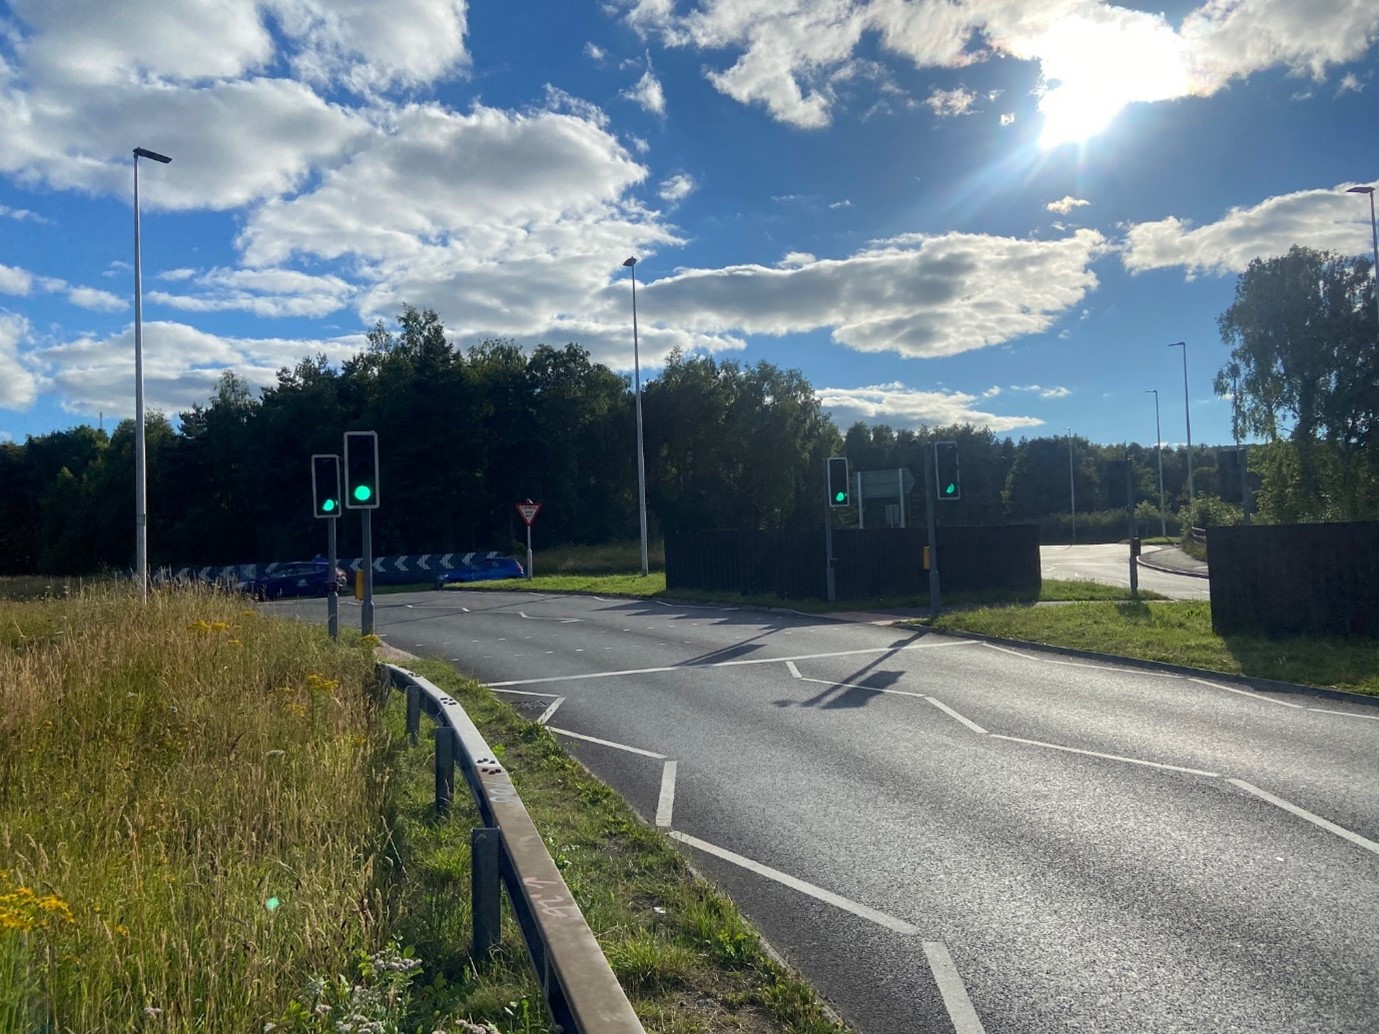 Image 2: A4042 Southbound approaching the new pedestrian crossing.